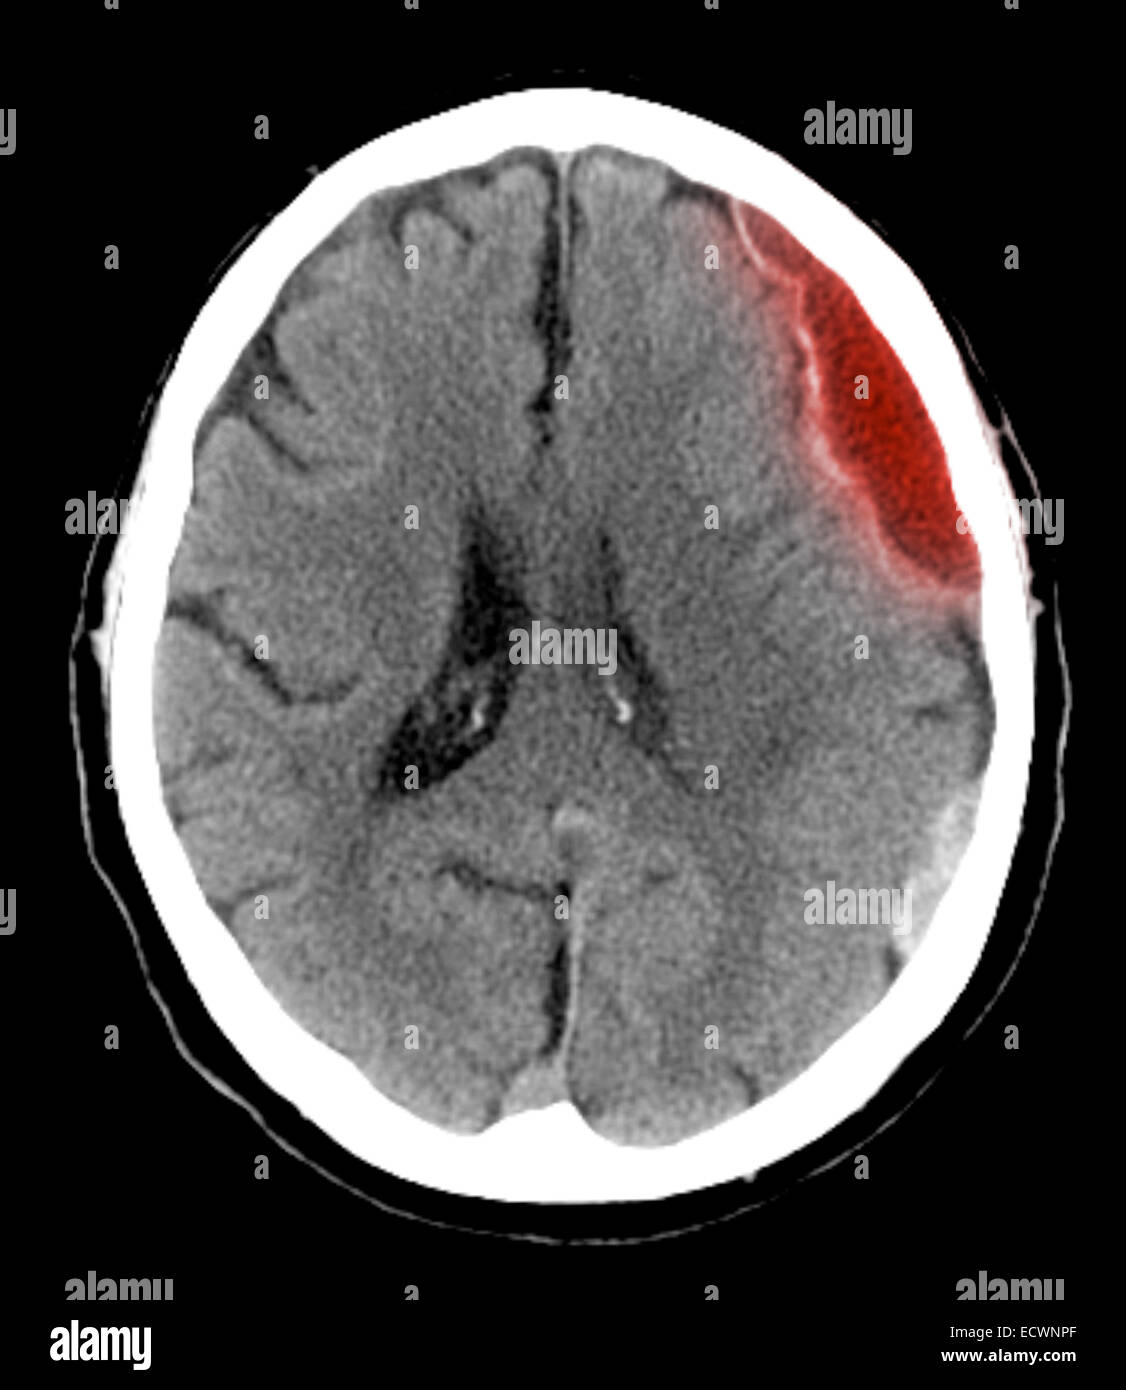 Ct Scan Of The Head Showing A Subdural Hematoma Stock Photo Sexiz Pix